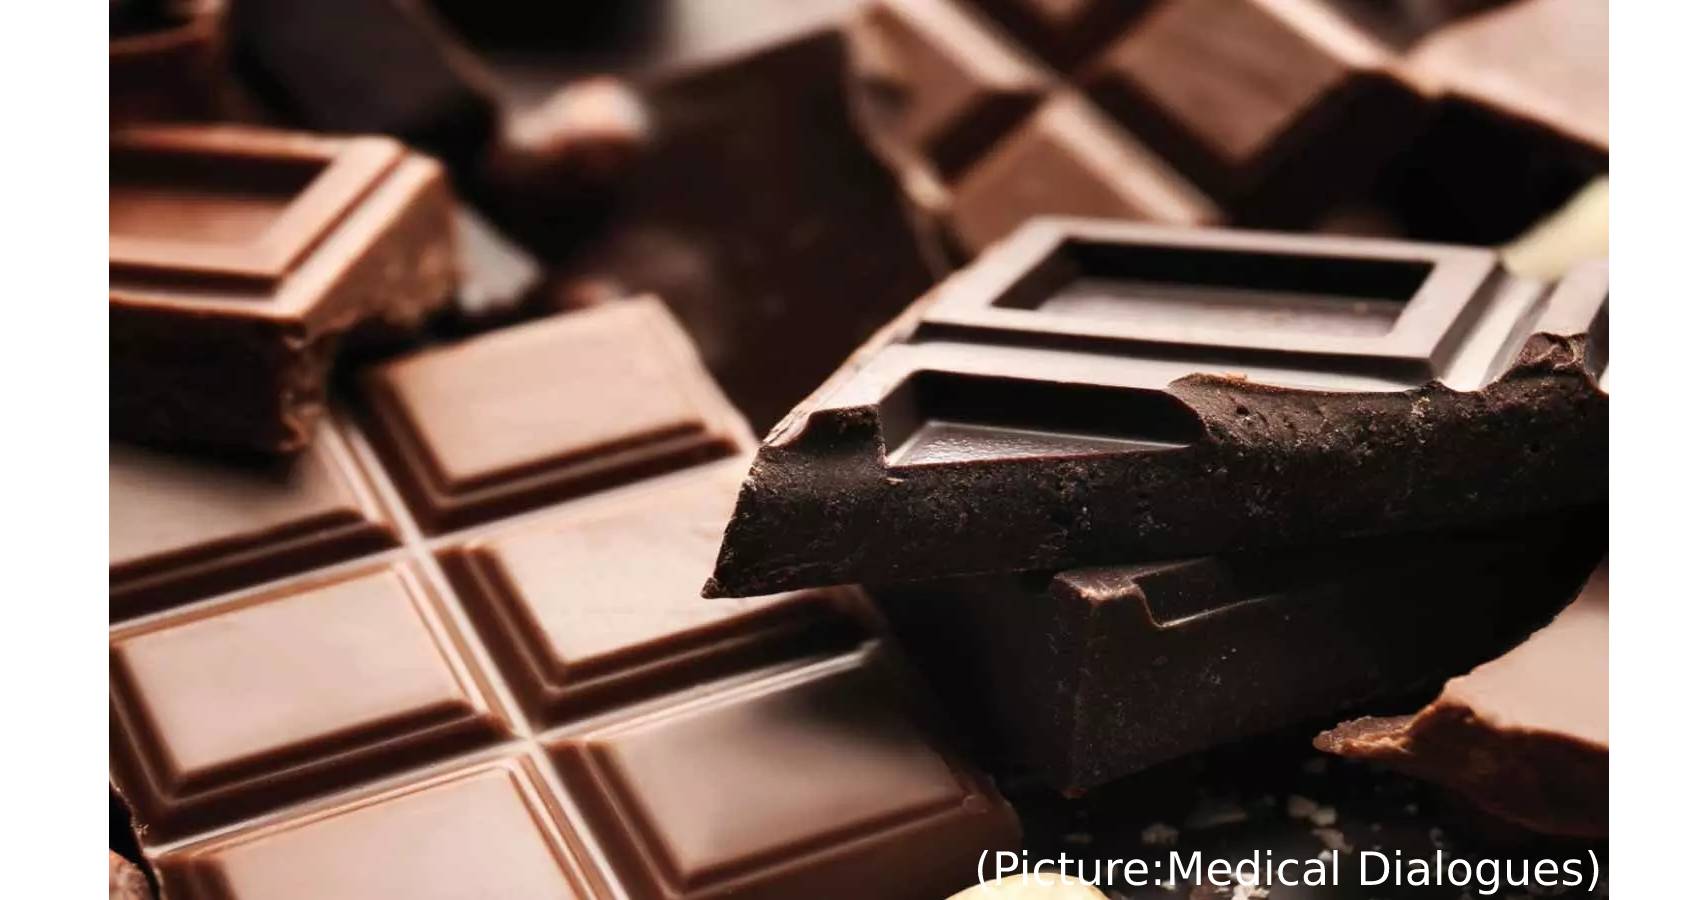 Eating Chocolate In The Morning Could Help Burn Fat, Reduce Blood Glucose